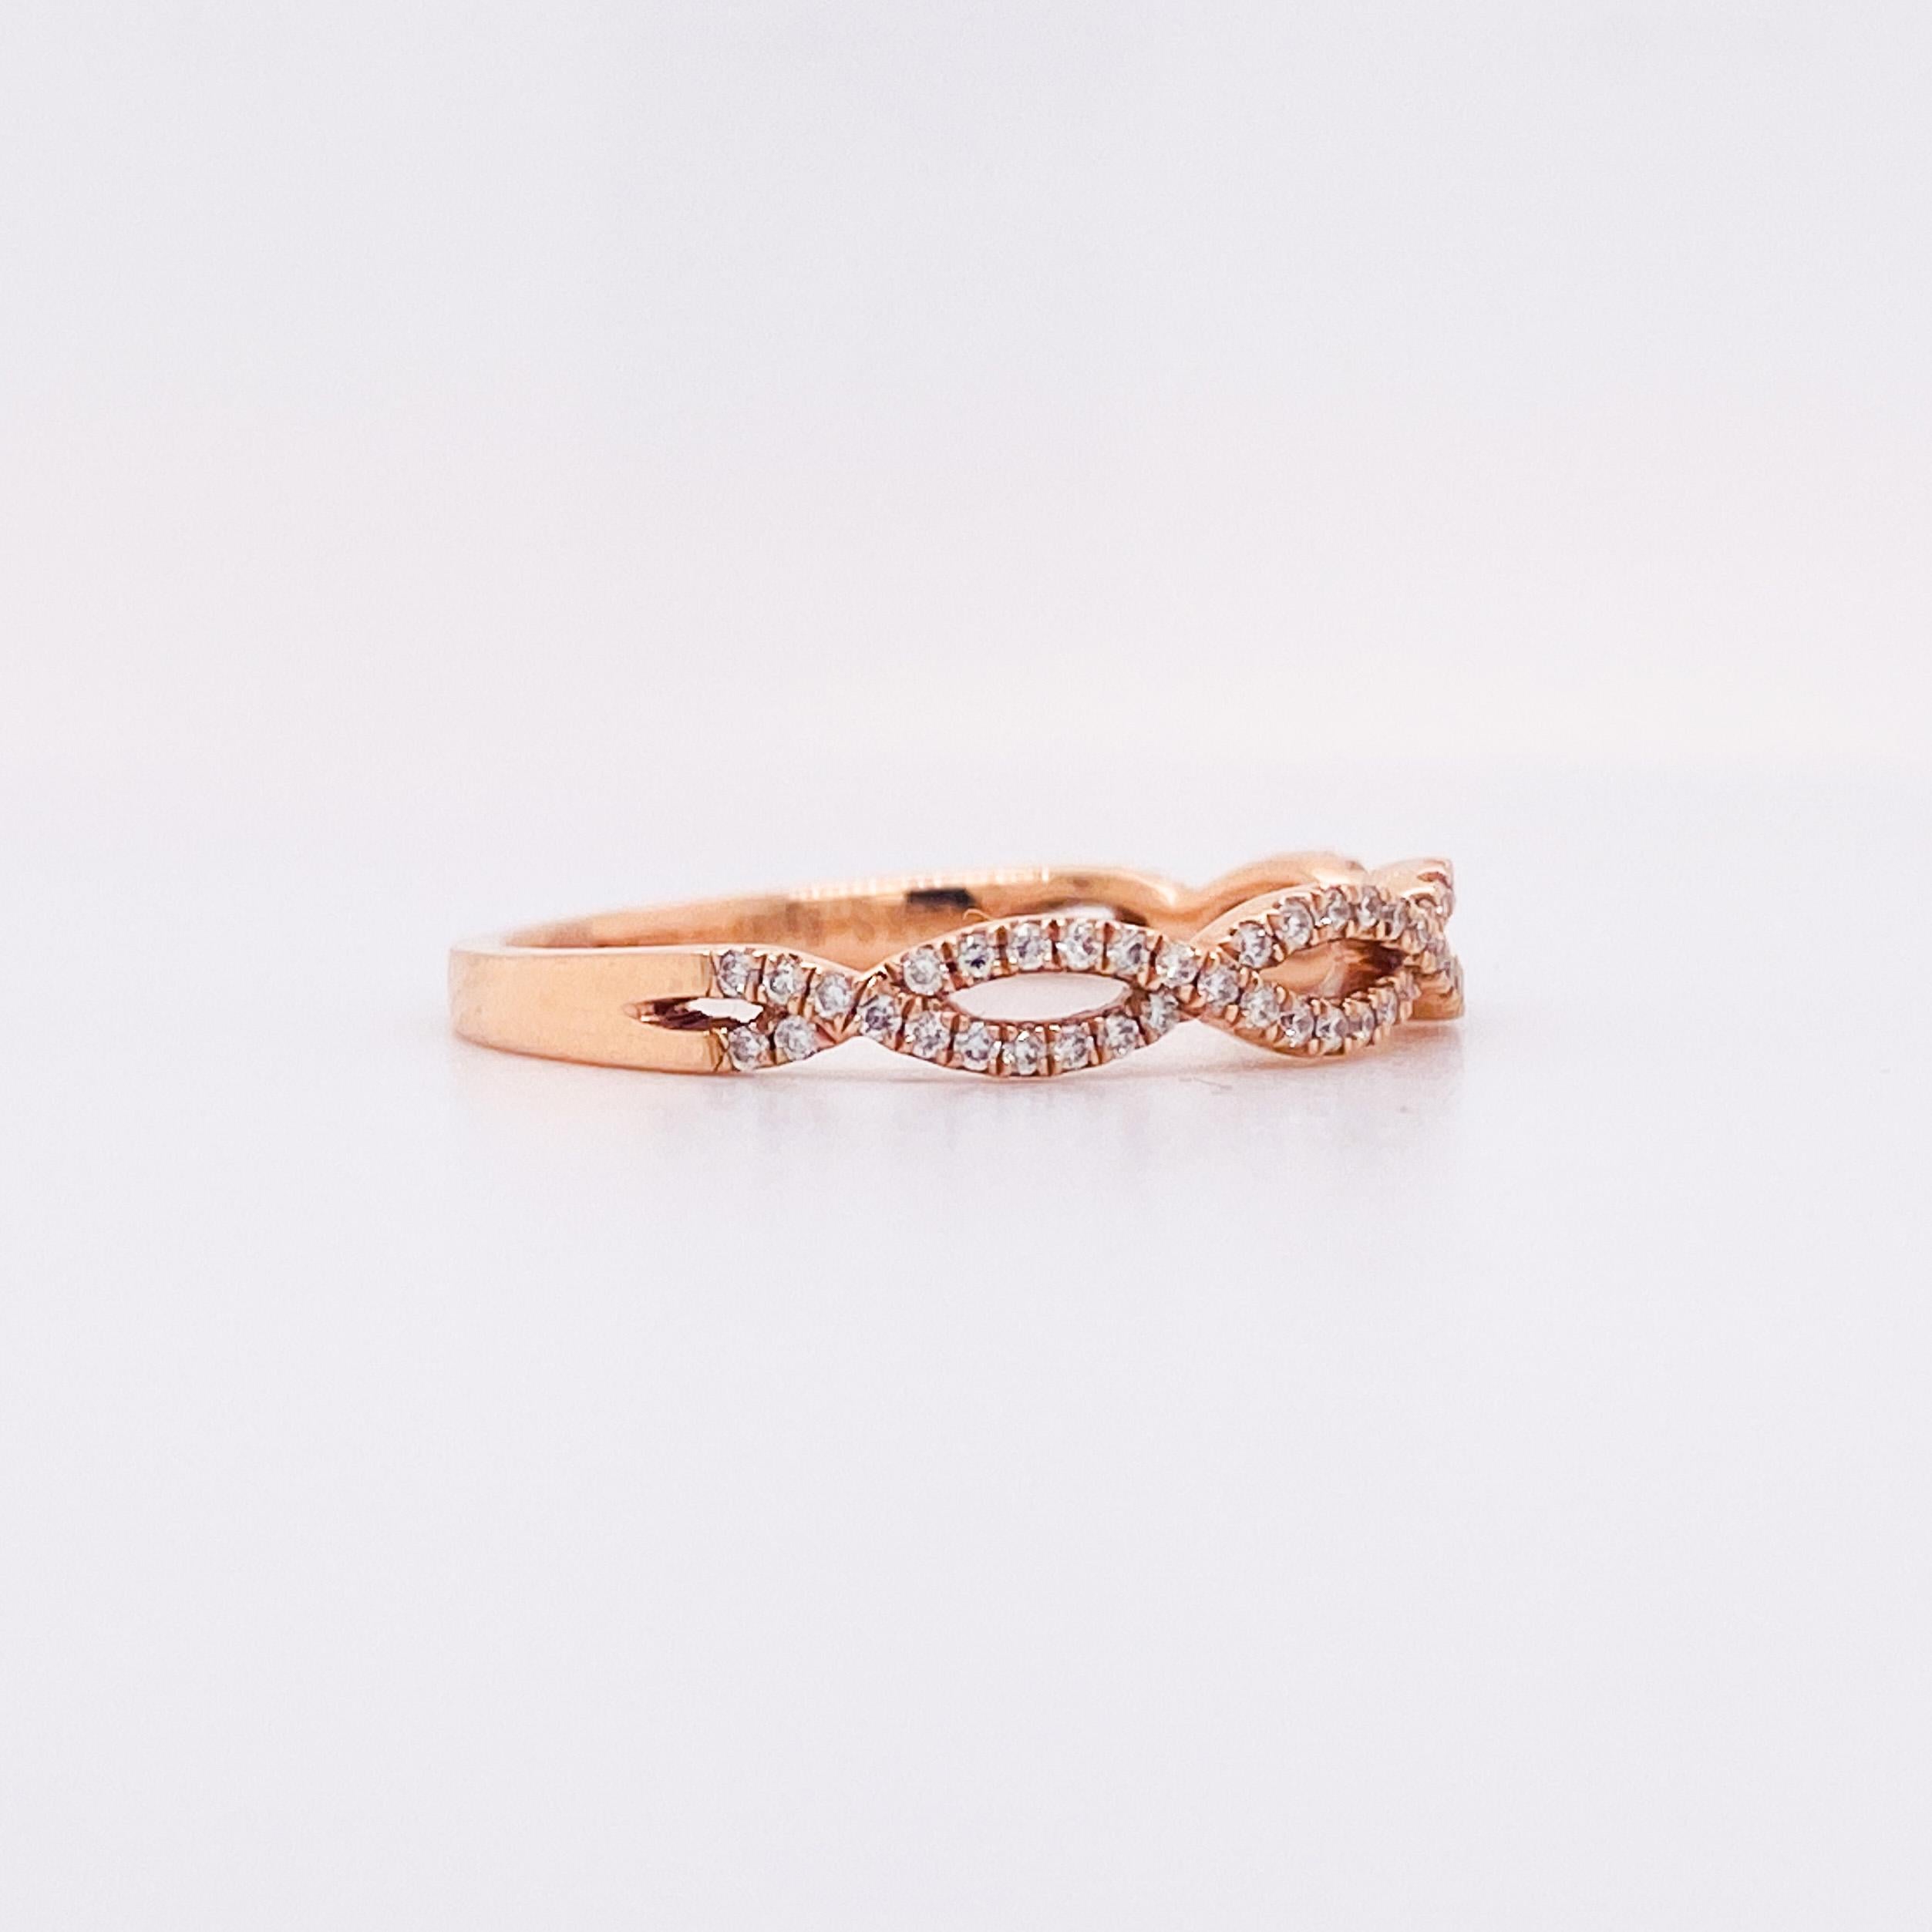 Like two ribbons, this ring has a gorgeous twisted woven braided design. Its pave diamond criss-cross design covers the top half of your finger. It makes for the perfect stand-alone or stackable band. The ring we have here in our store is made in 14